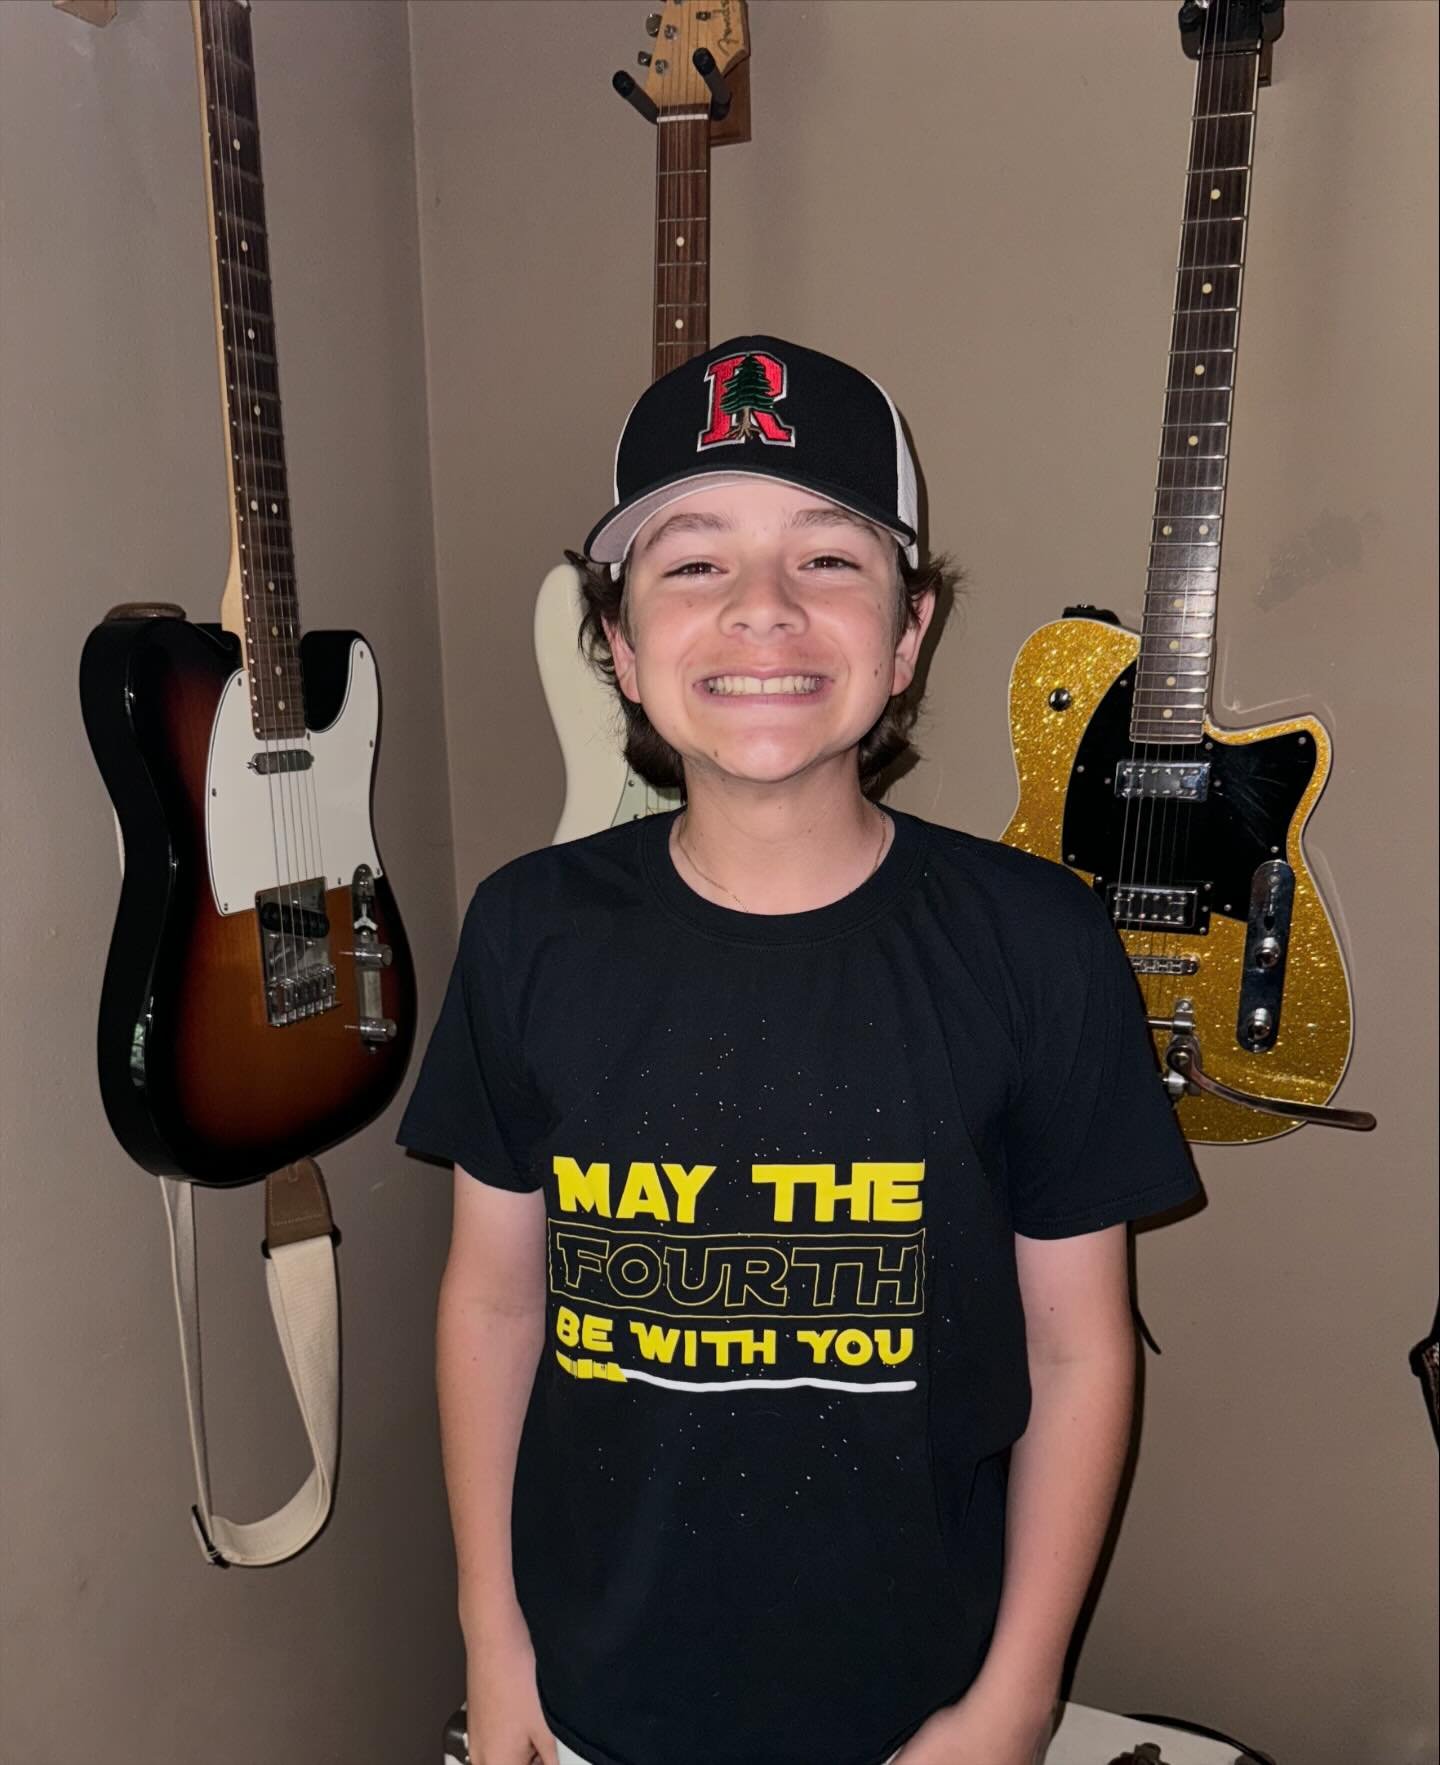 Happy Star Wars Day! Thank you to our #Valorant player for letting us post your tee!

#maythe4thbewithyou #starwarsday